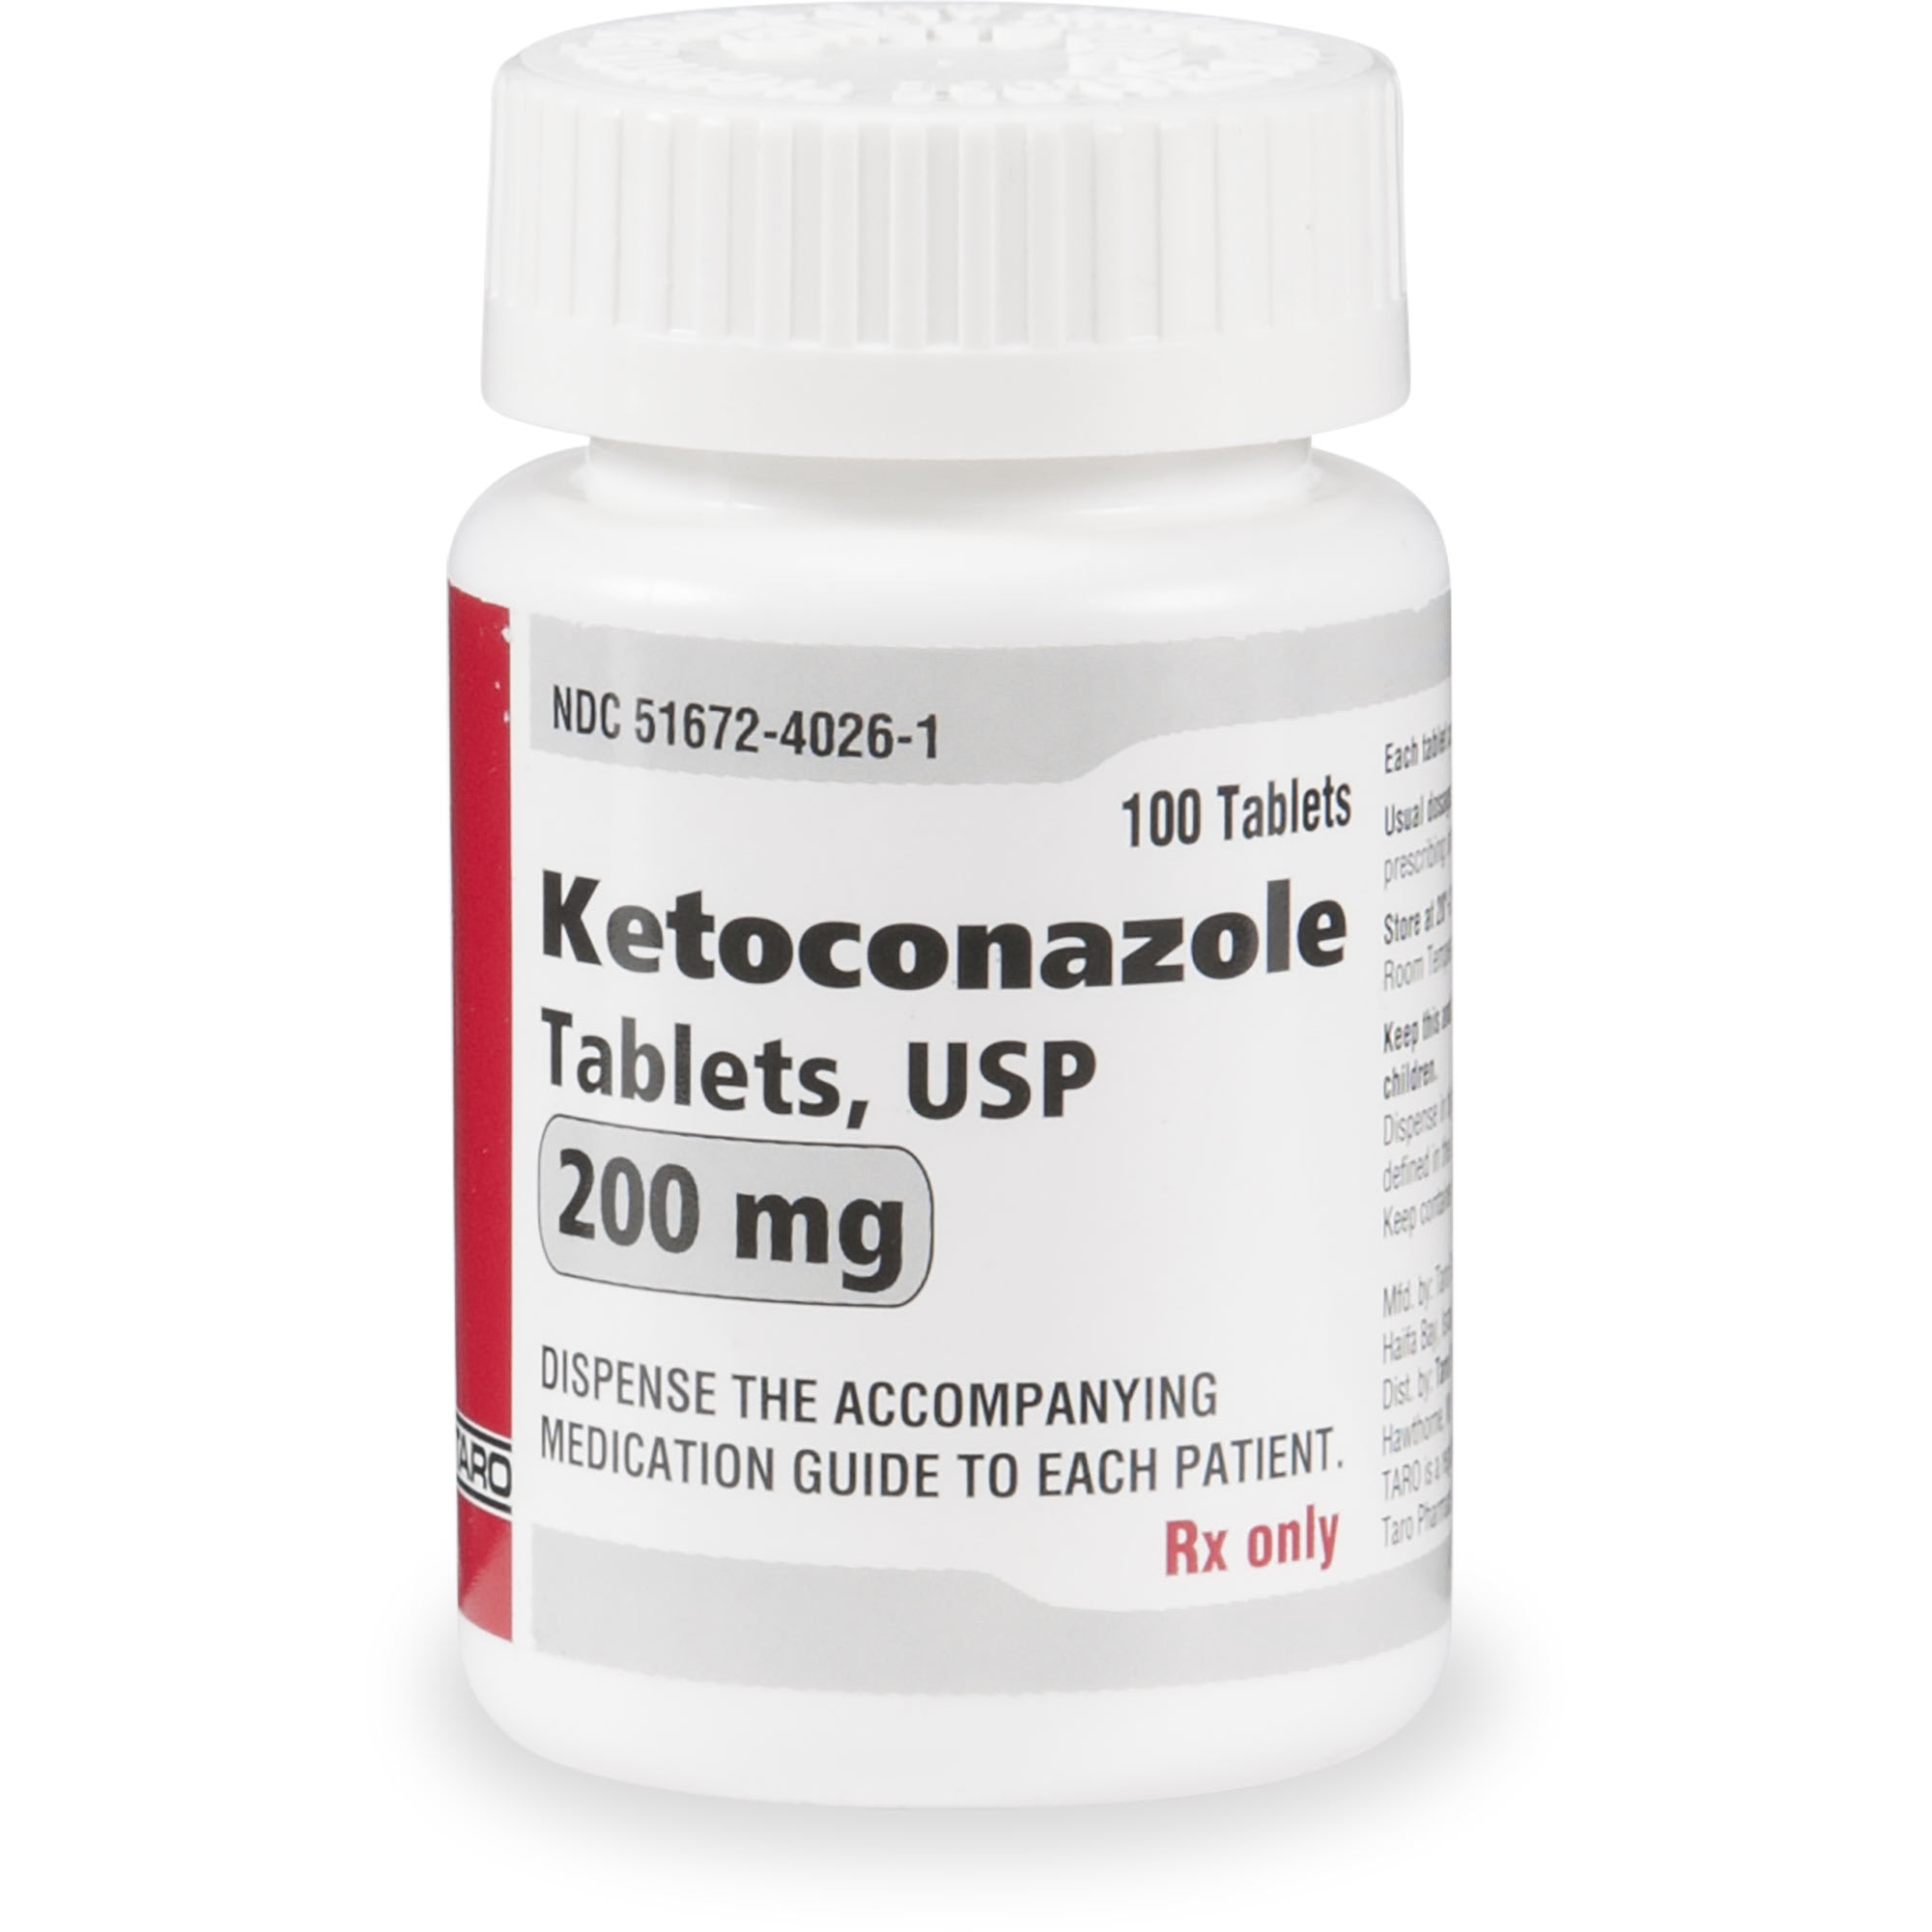 what are the uses of ketoconazole tablets